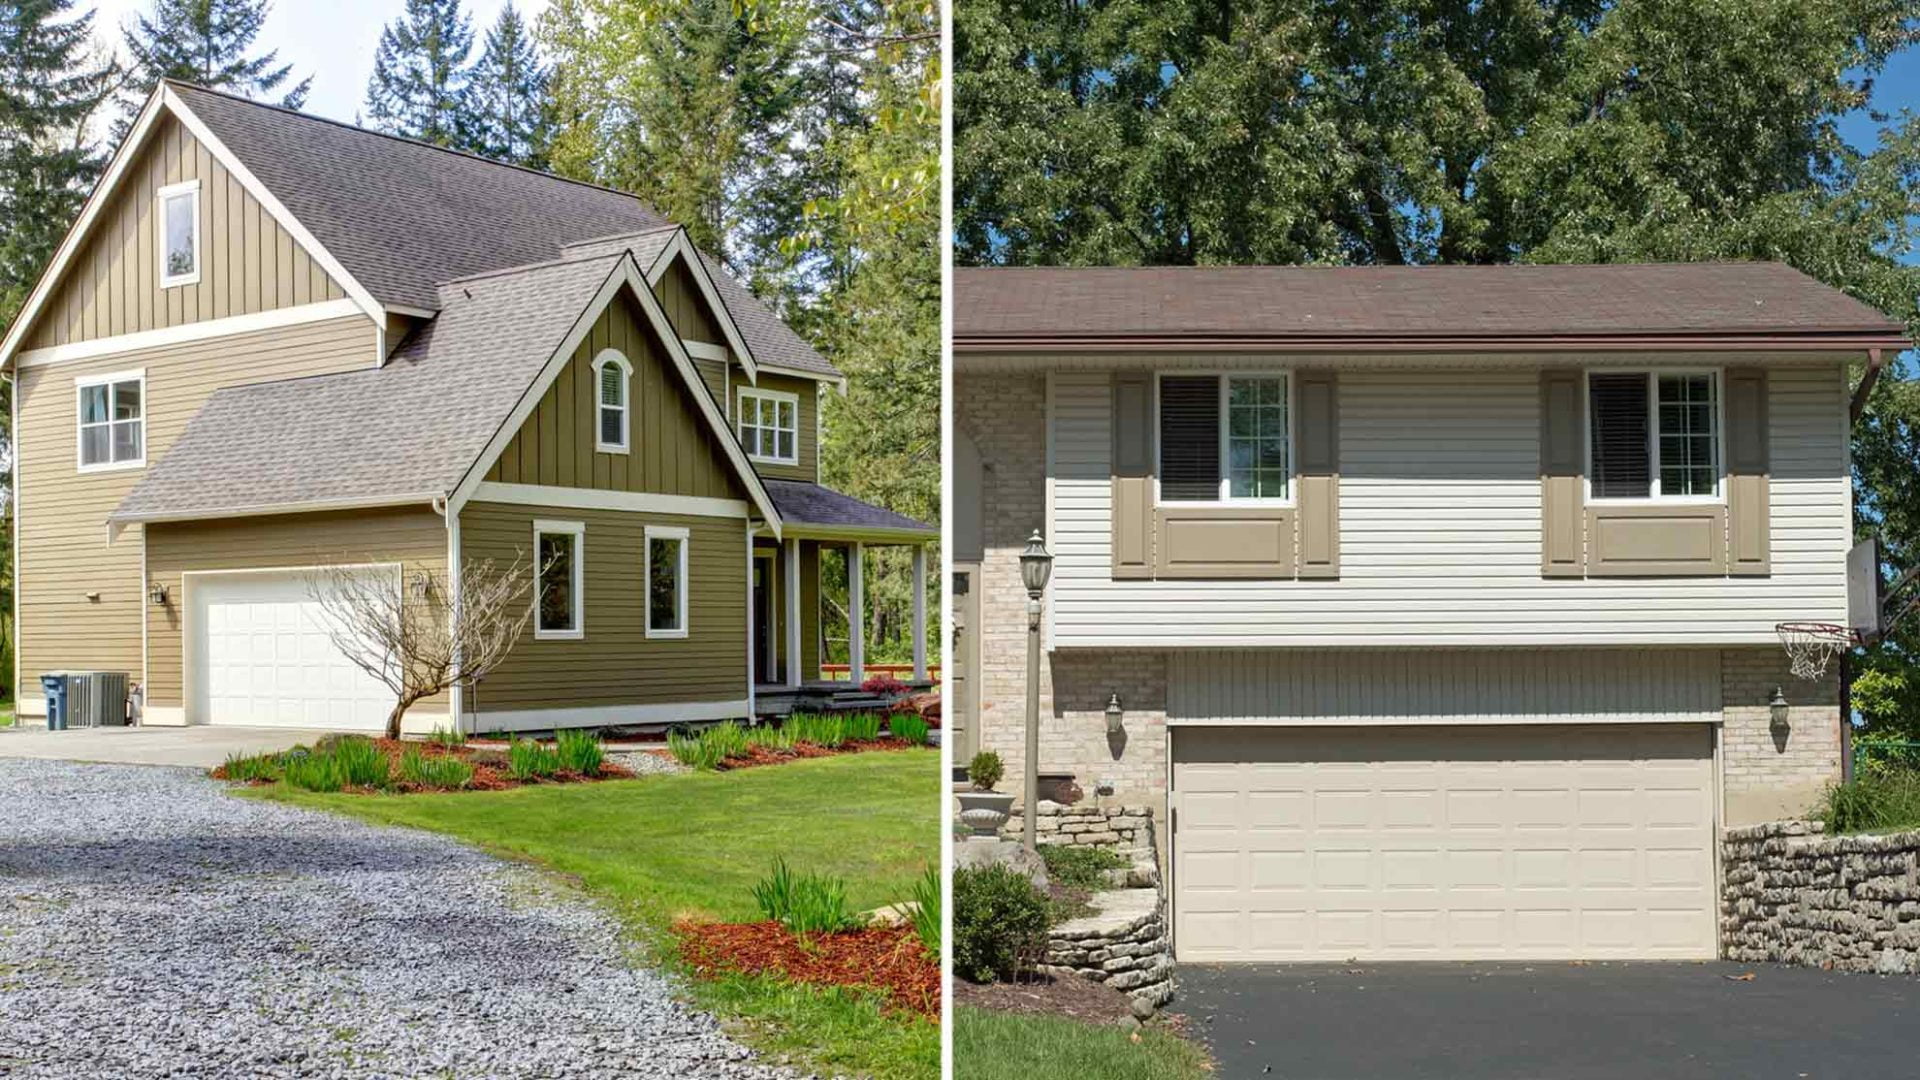 House with gravel driveway on the left; house with asphalt driveway on the right